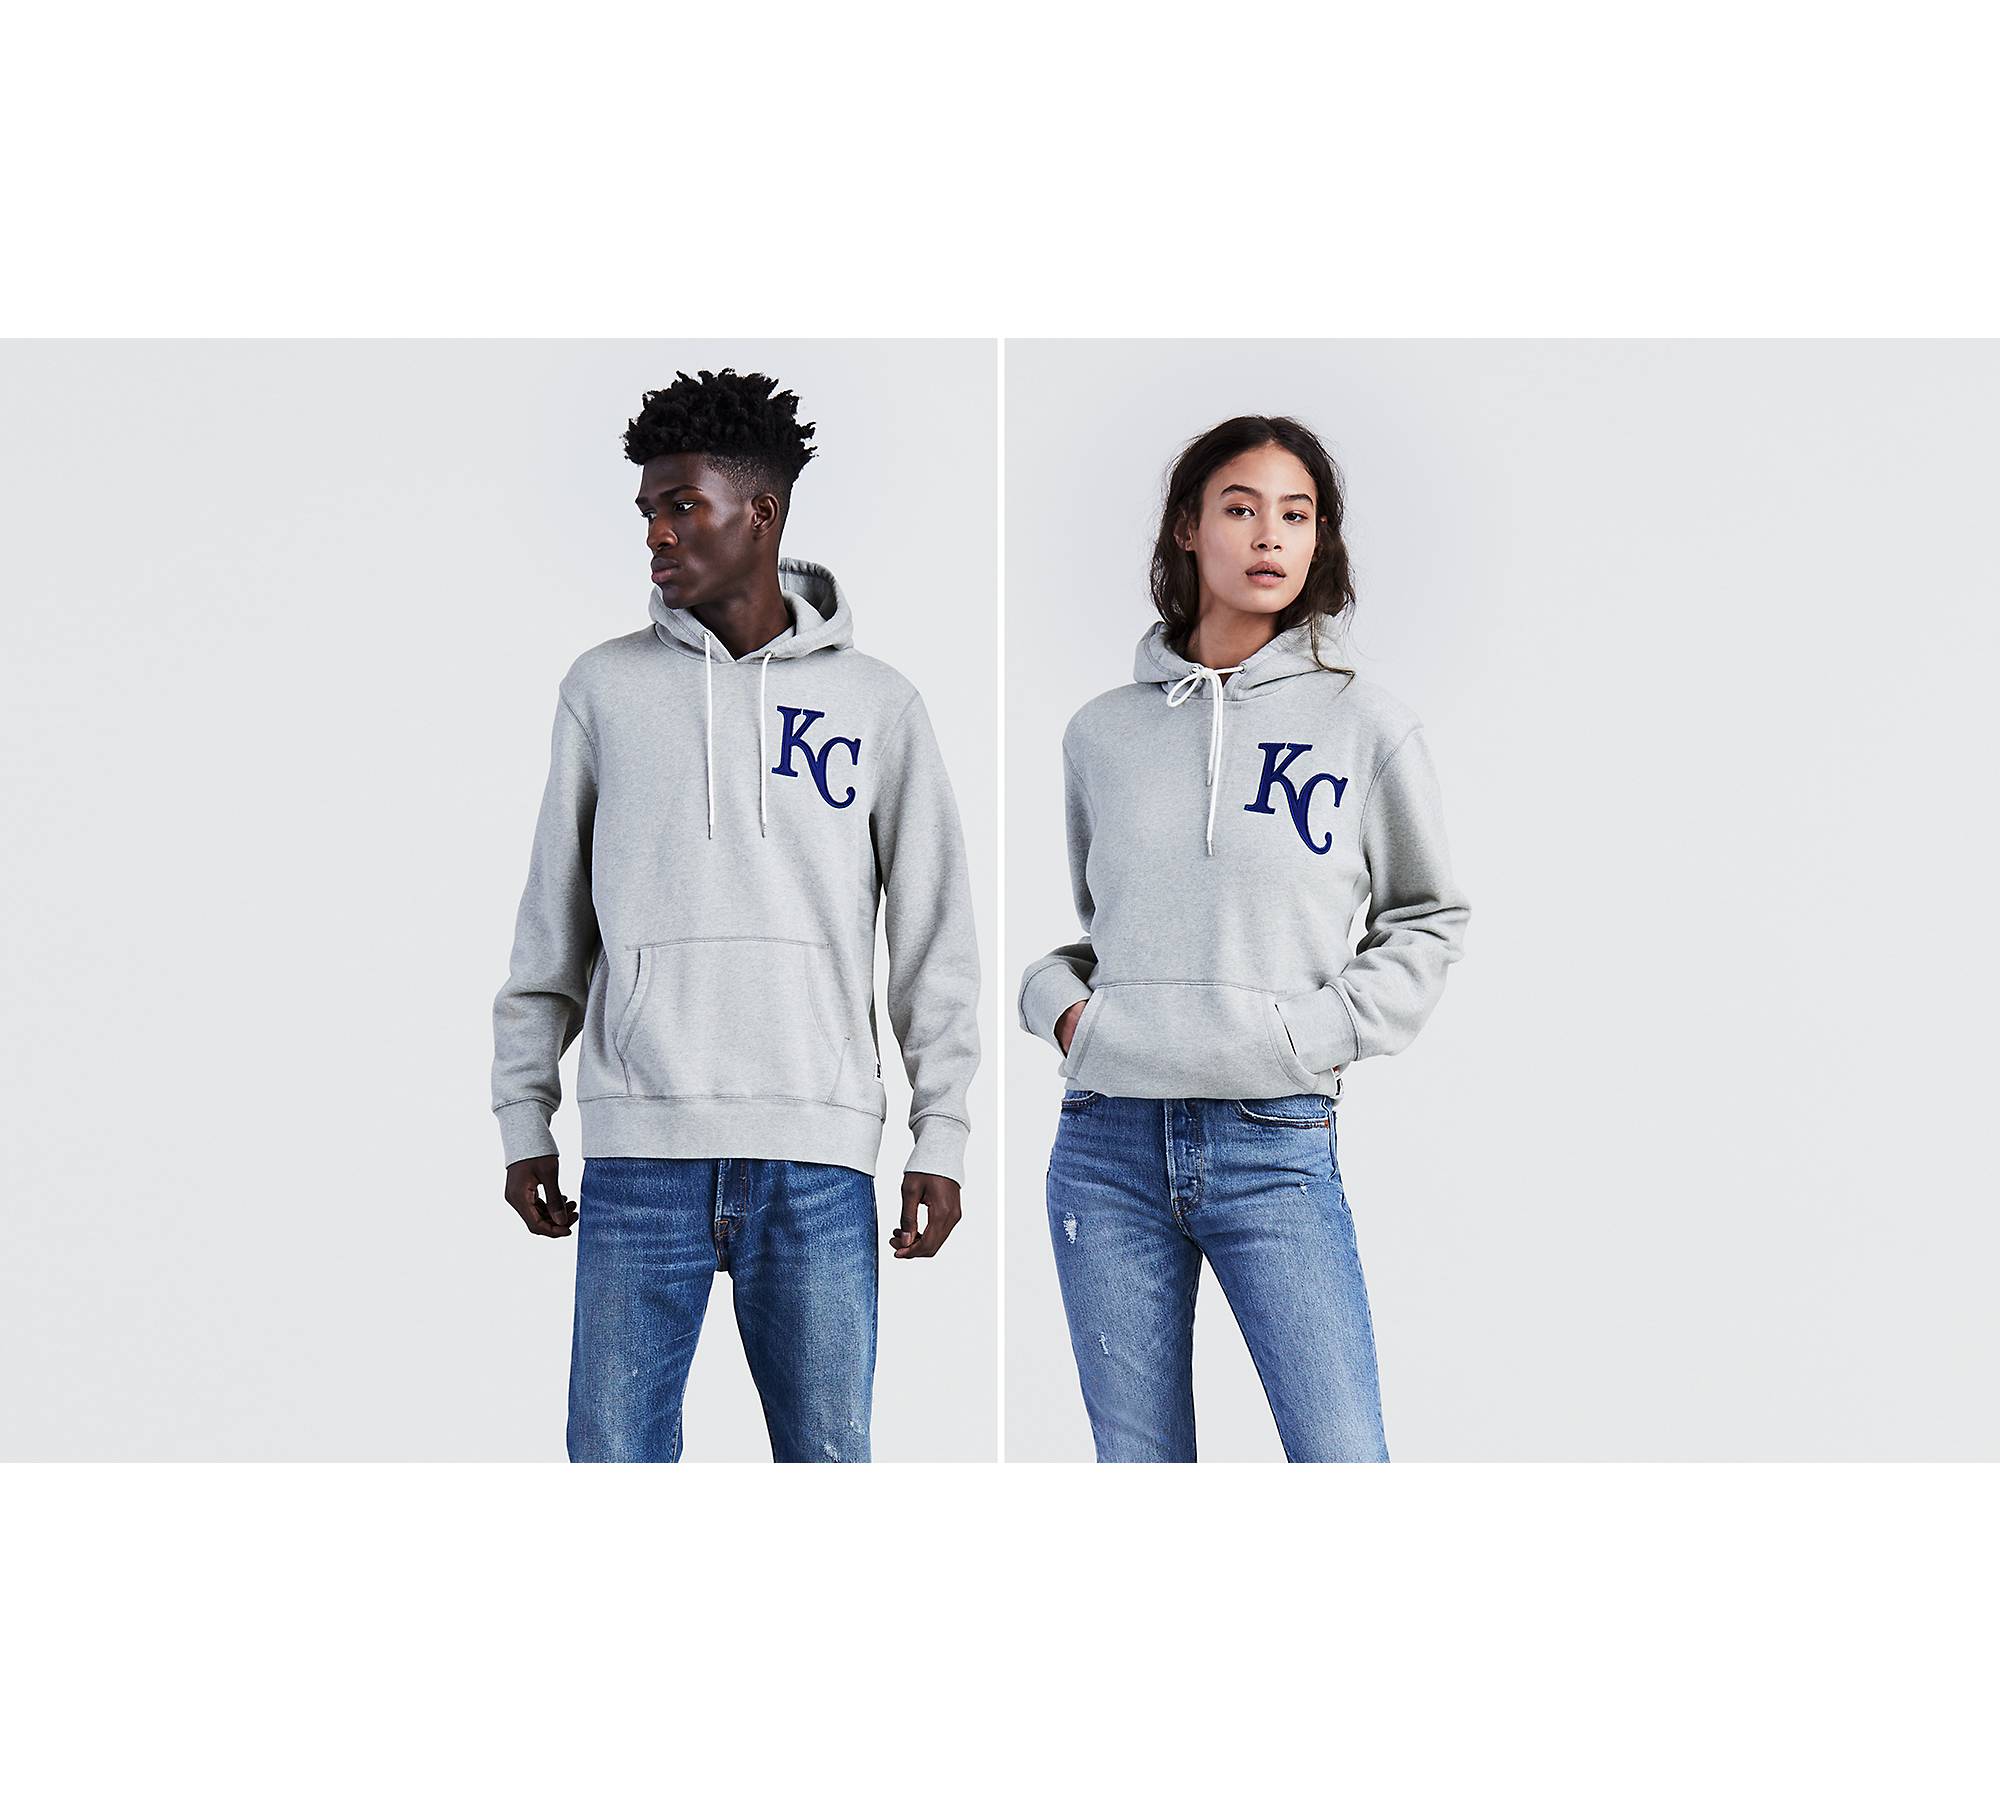 Levi's Los Angeles Dodgers Mlb Long Sleeve Hoodie in Gray for Men